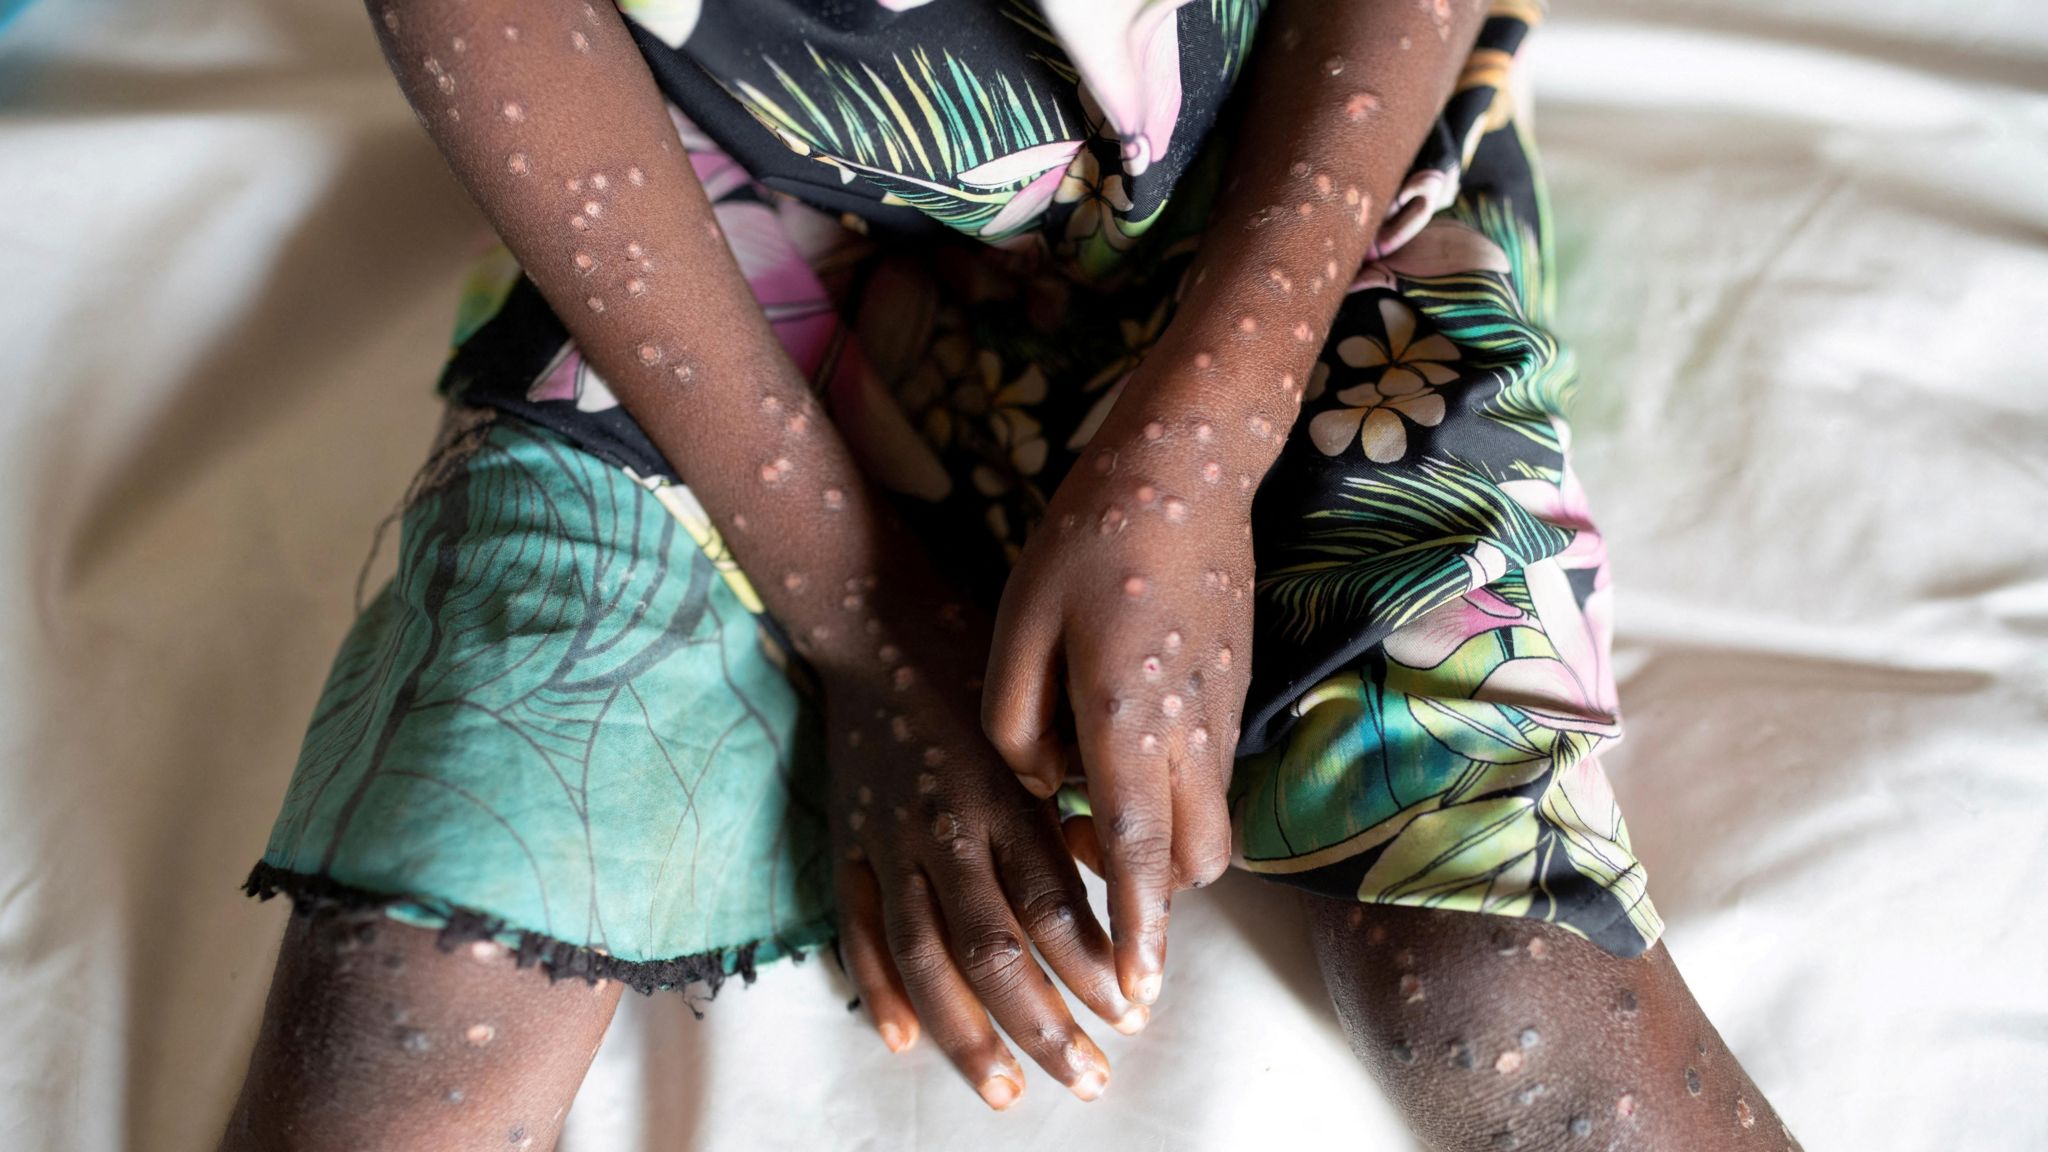 A young girl with mpox lesions on her arms and legs during an outbreak in DR Congo in 2022